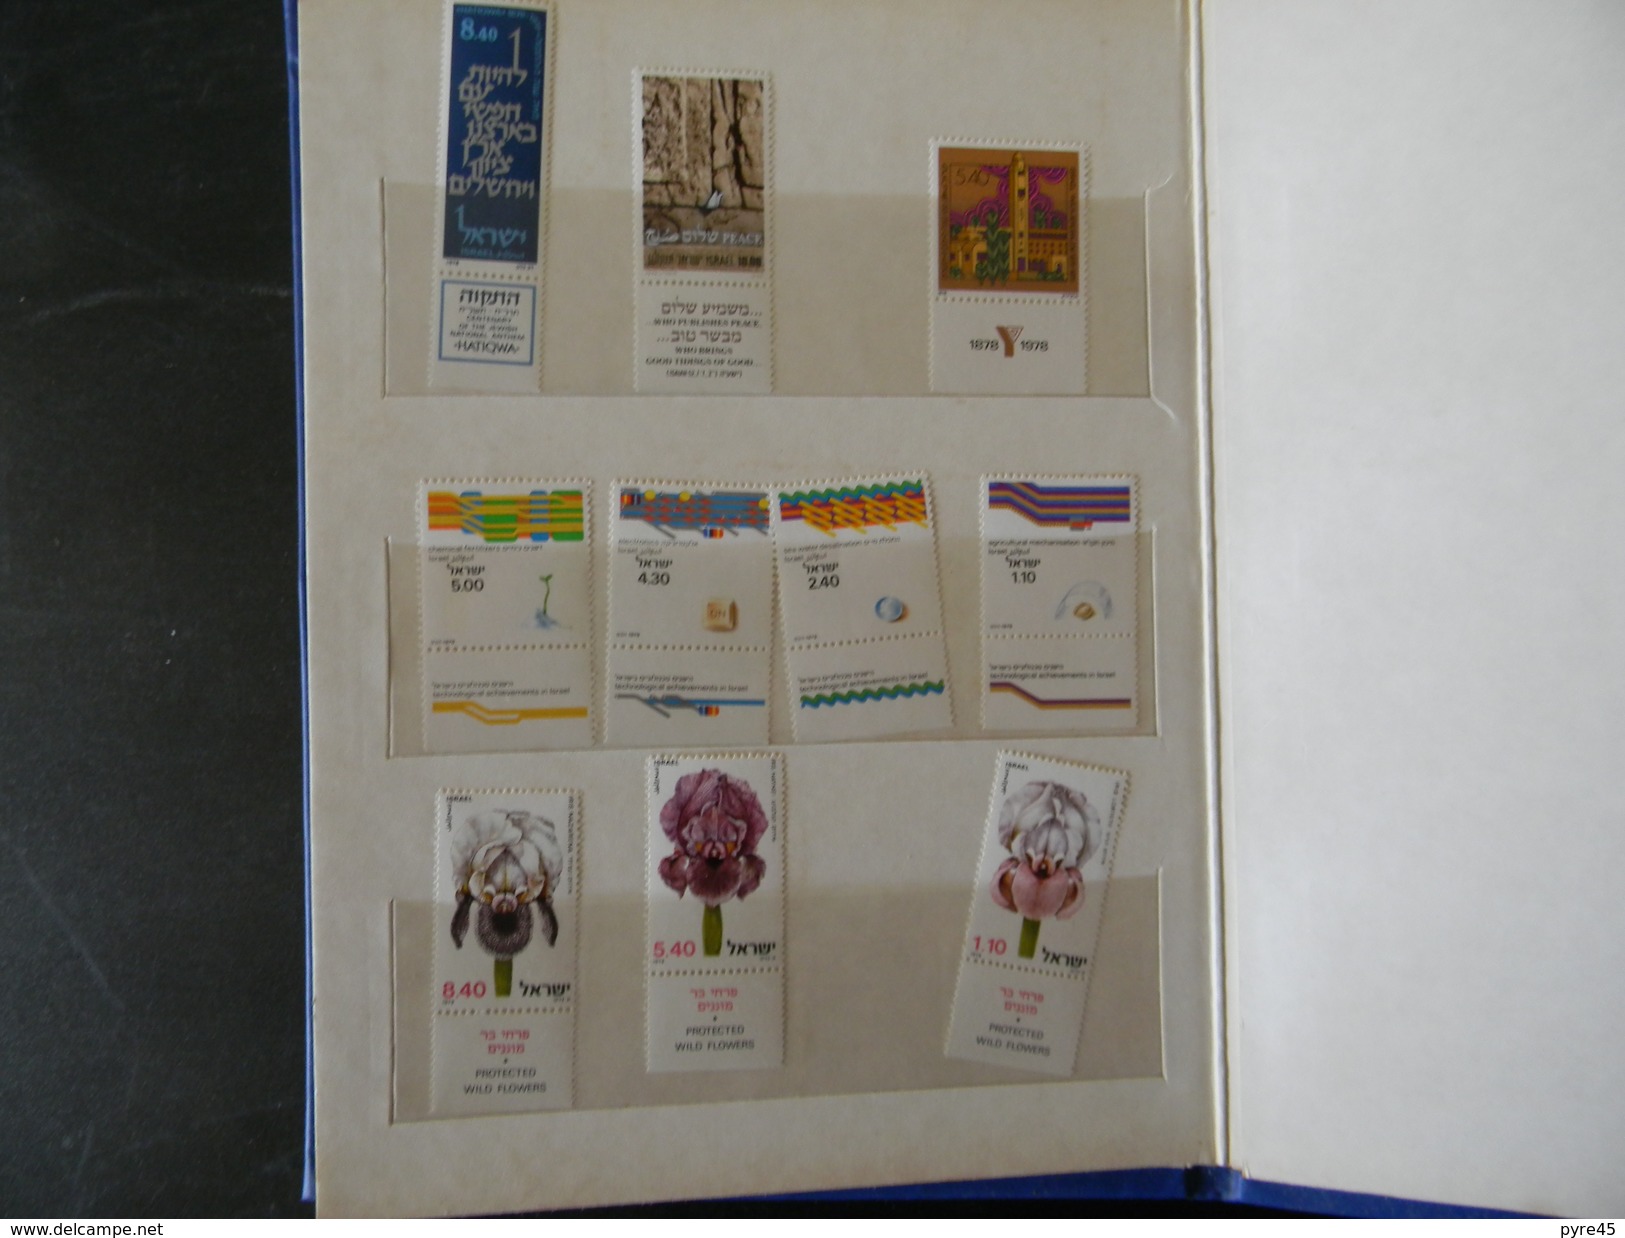 COLLECTION D ISRAEL XVIII TH CONGRESS OF UPU 1979 MINISTRY OF COMMUNICATIONS JERUSALEM - Collections, Lots & Séries